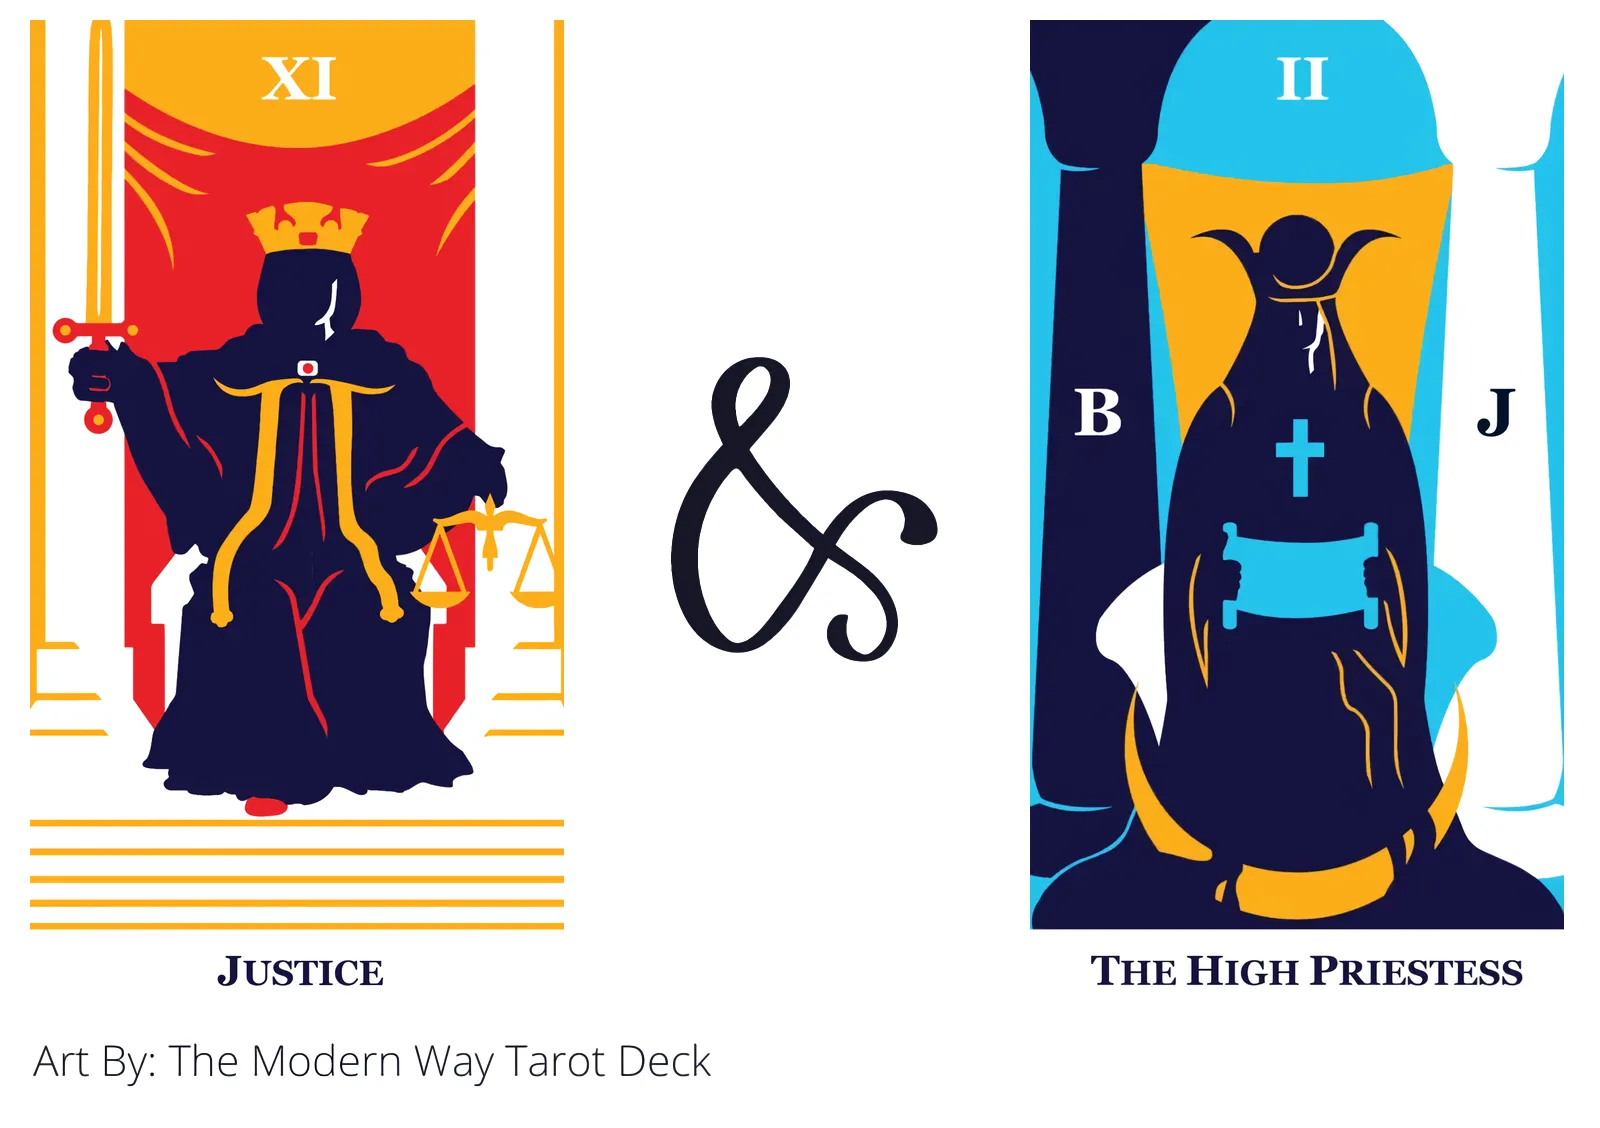 justice and the high priestess tarot cards together